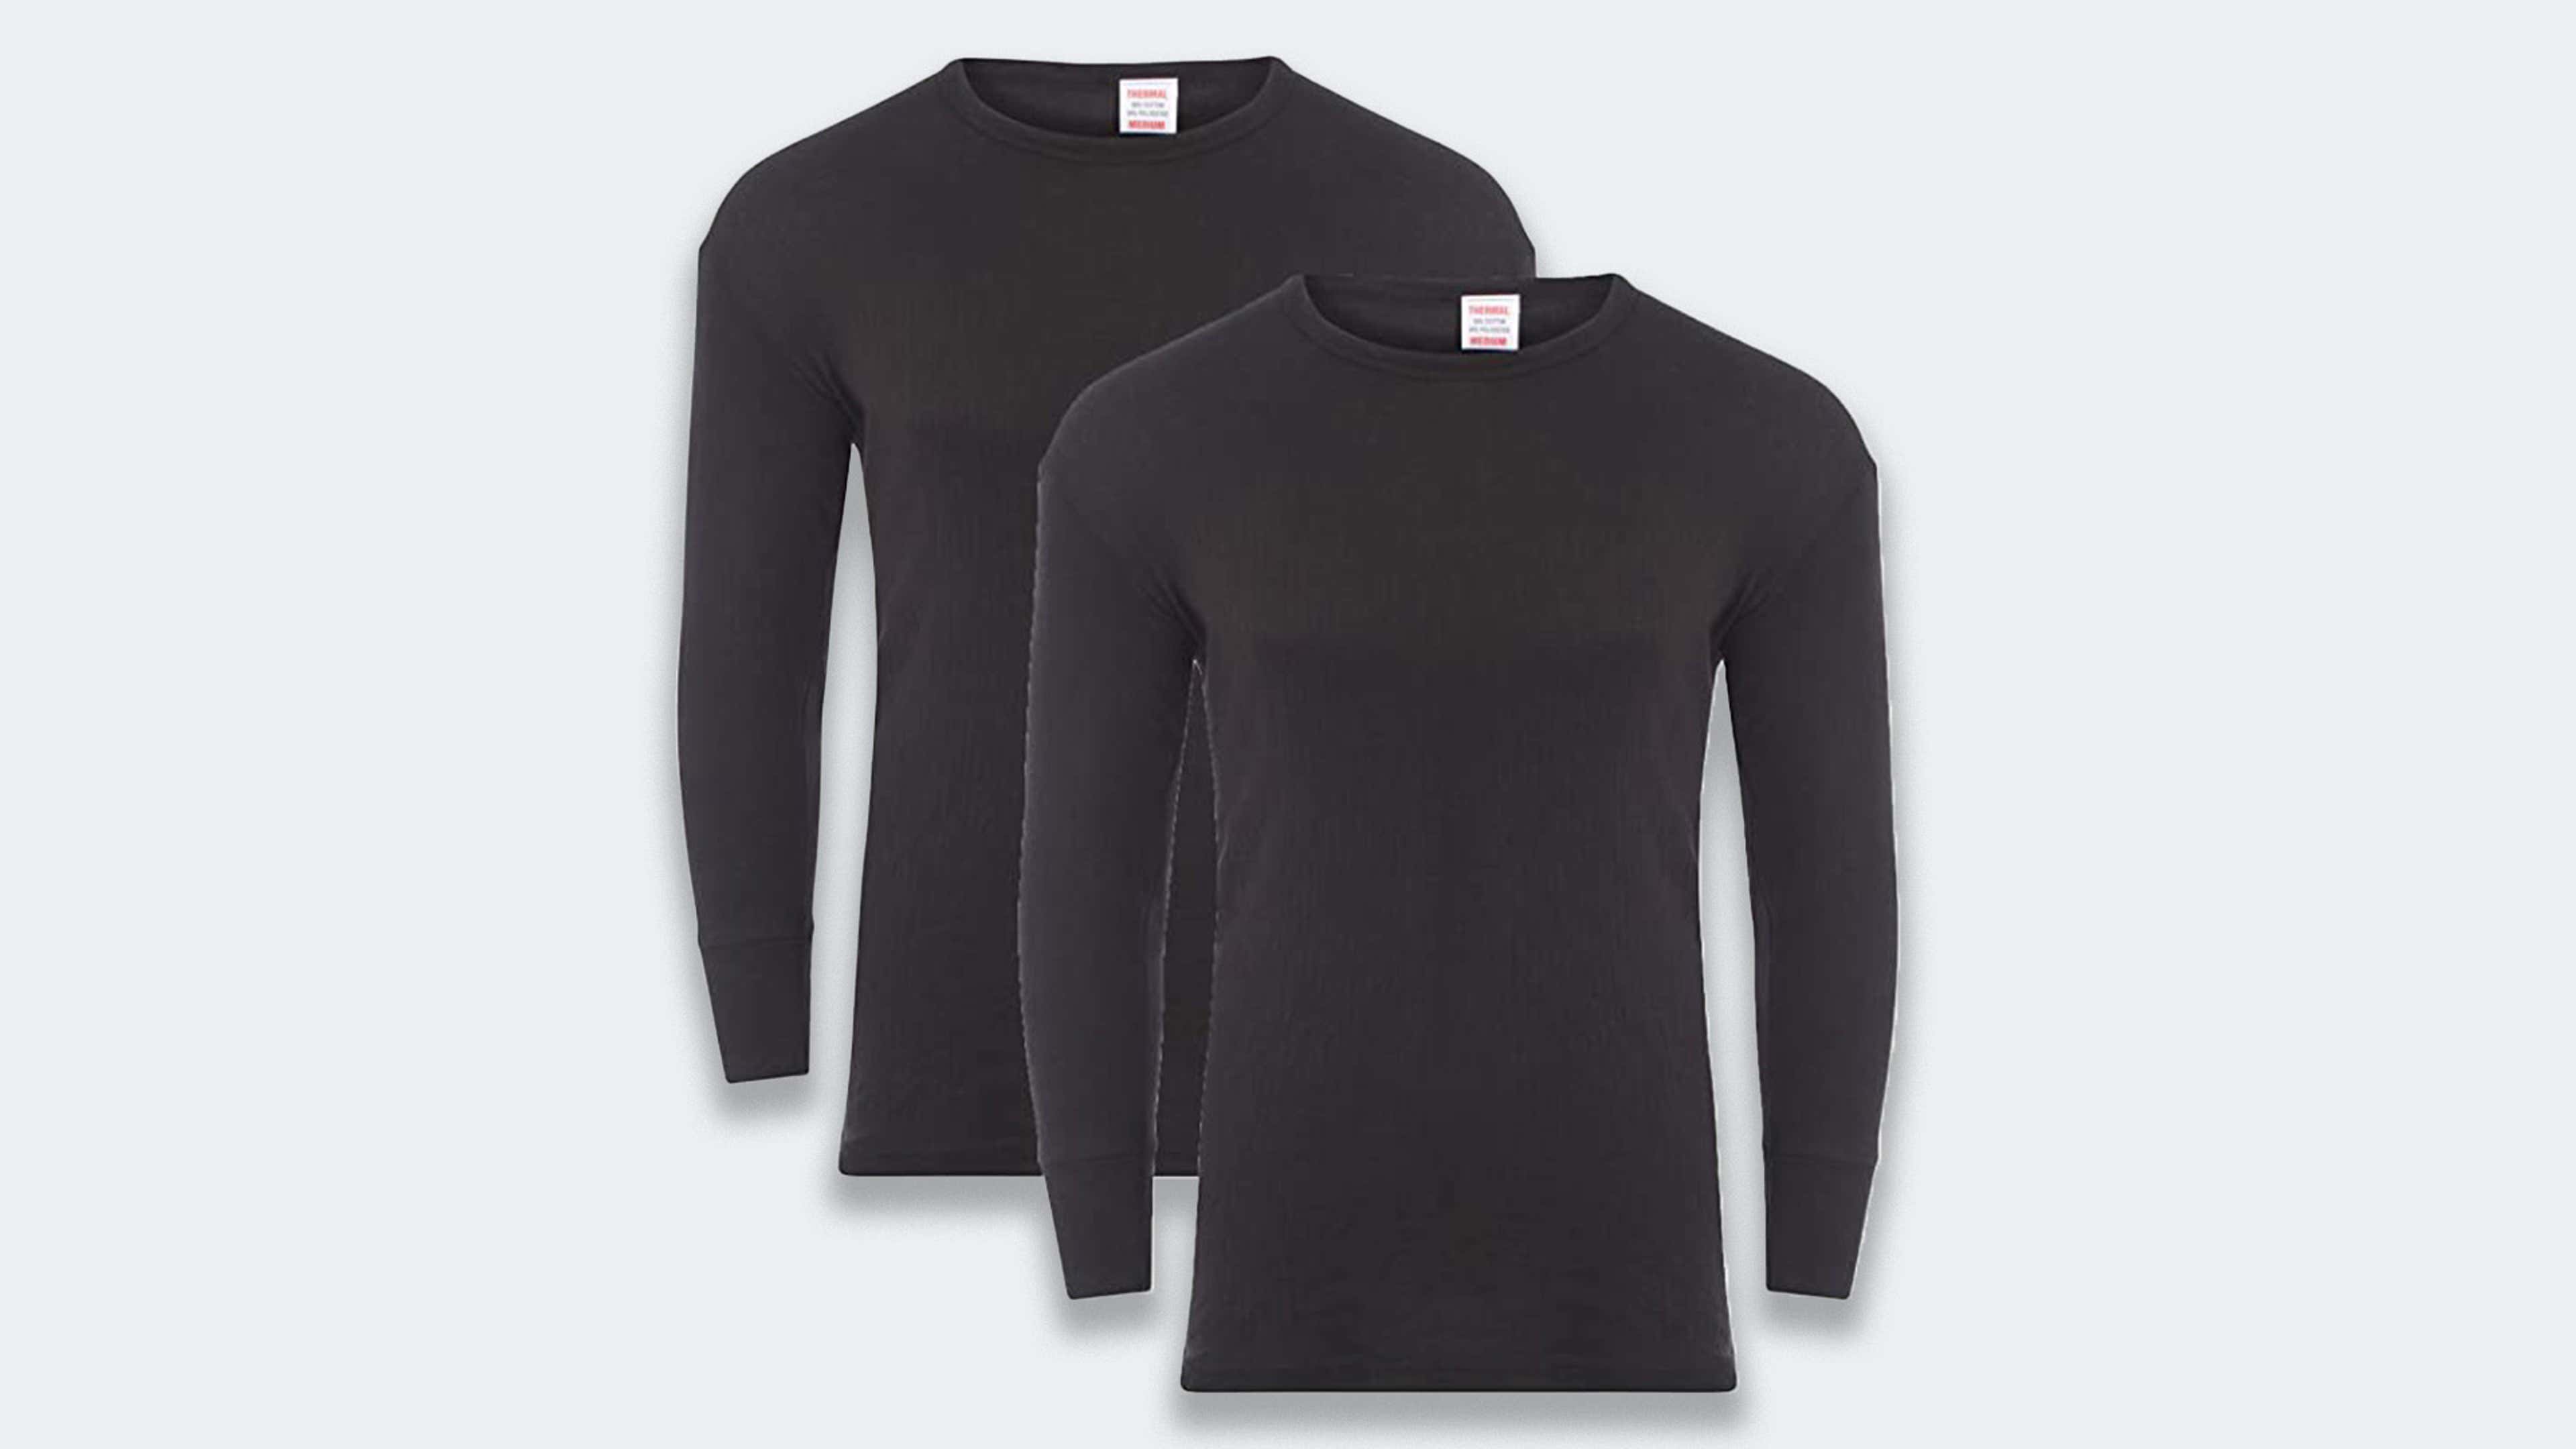 The 12 best men's thermal tops and base layers for winter